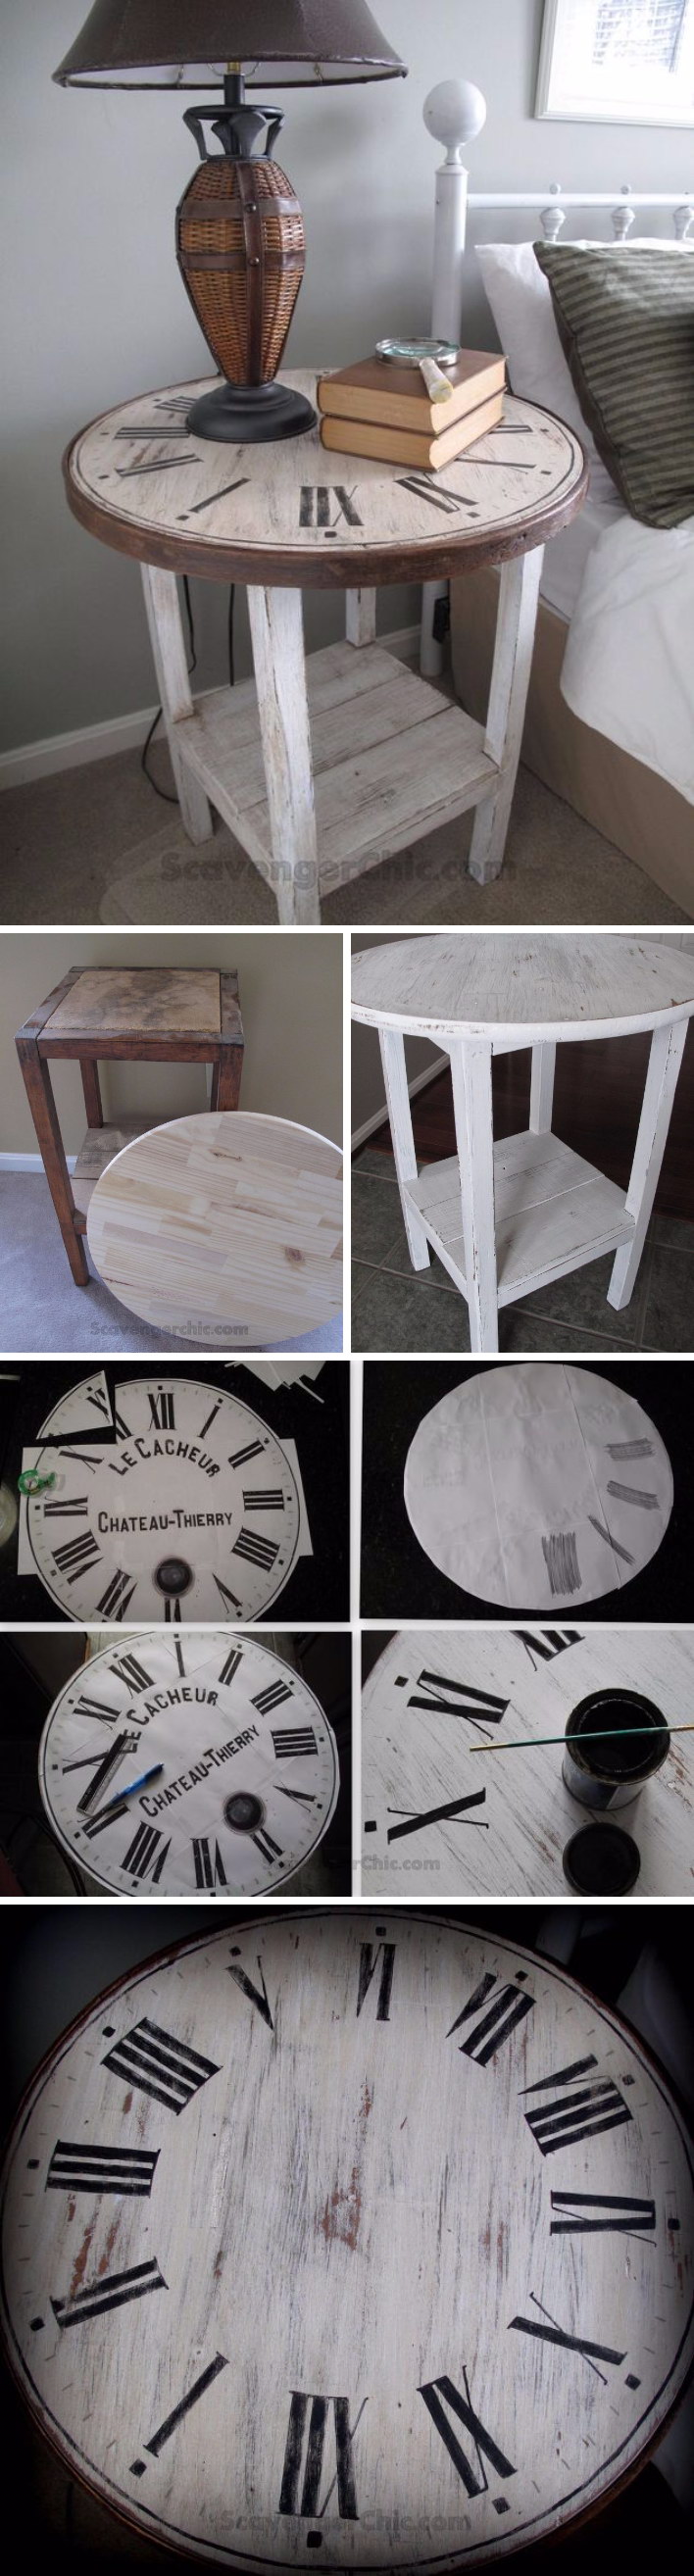 diy side table ideas with lots tutorials wire basket accent vintage clock white and silver patio seating distressed grey quatrefoil end mirror office metal outdoor antique drop